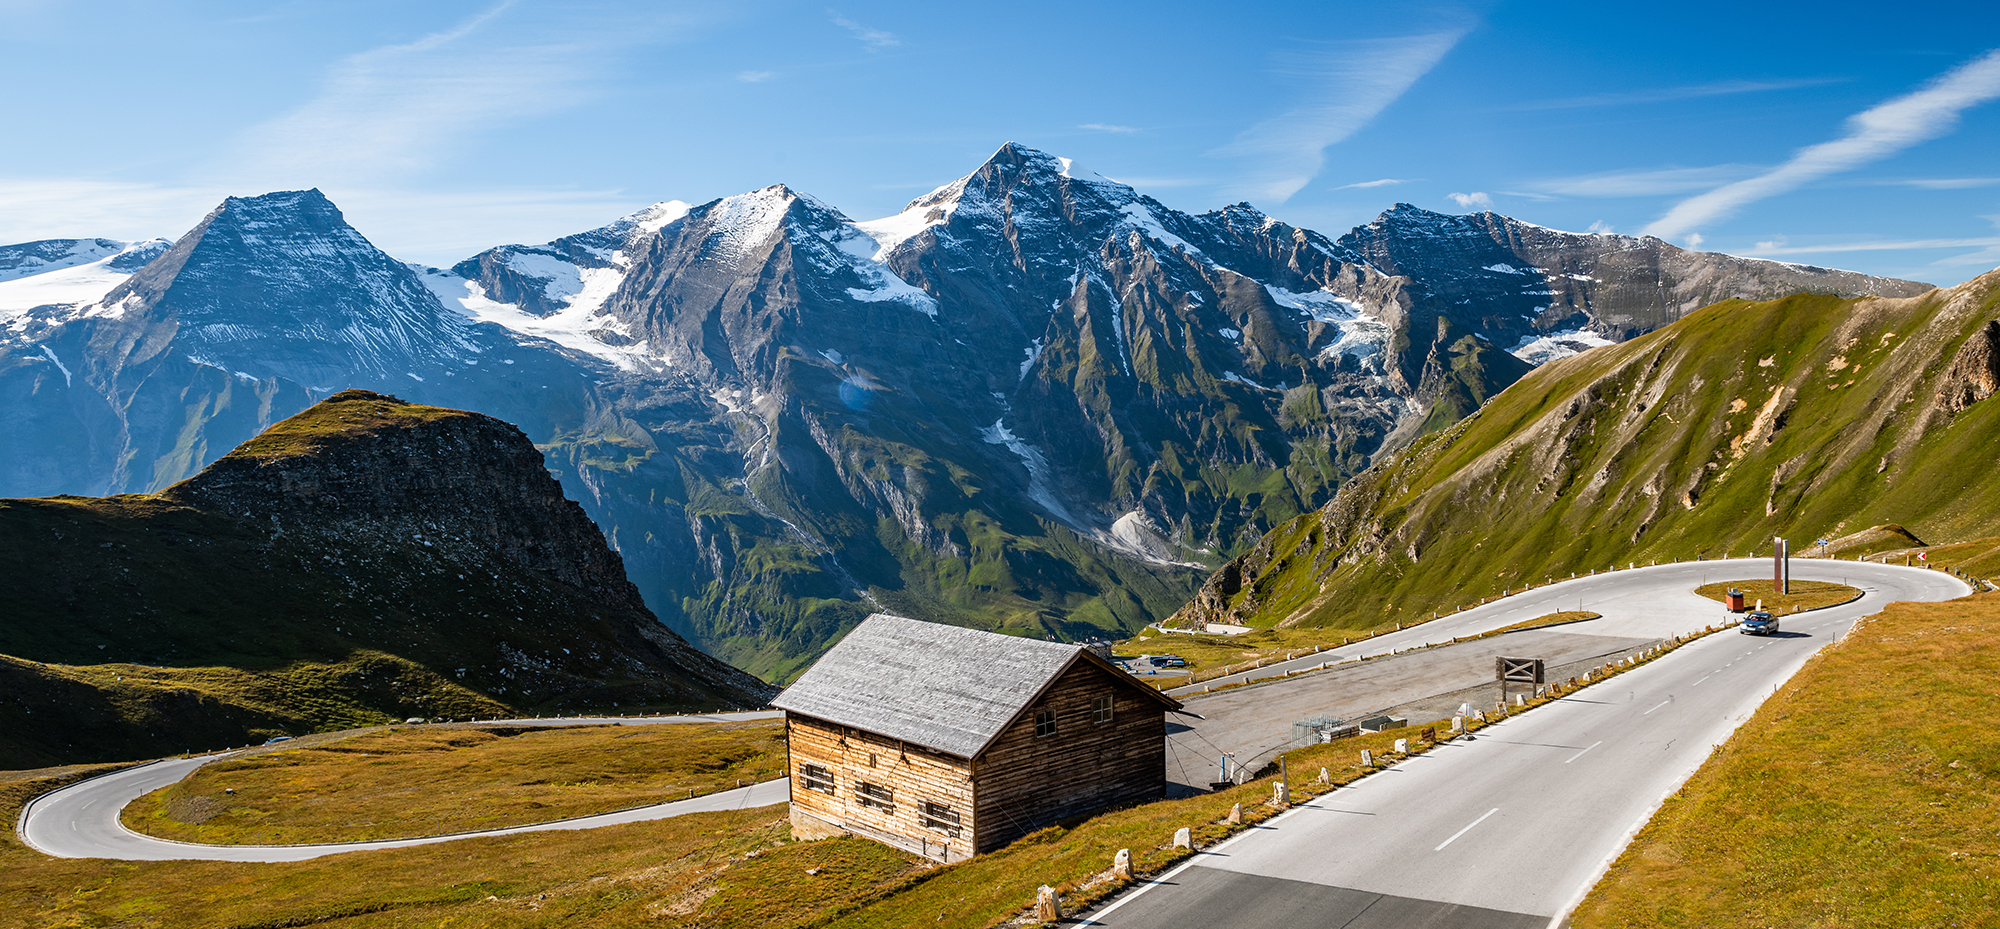 The Grossglockner High Alpine Road - the highest and most beautiful pass road in Austria